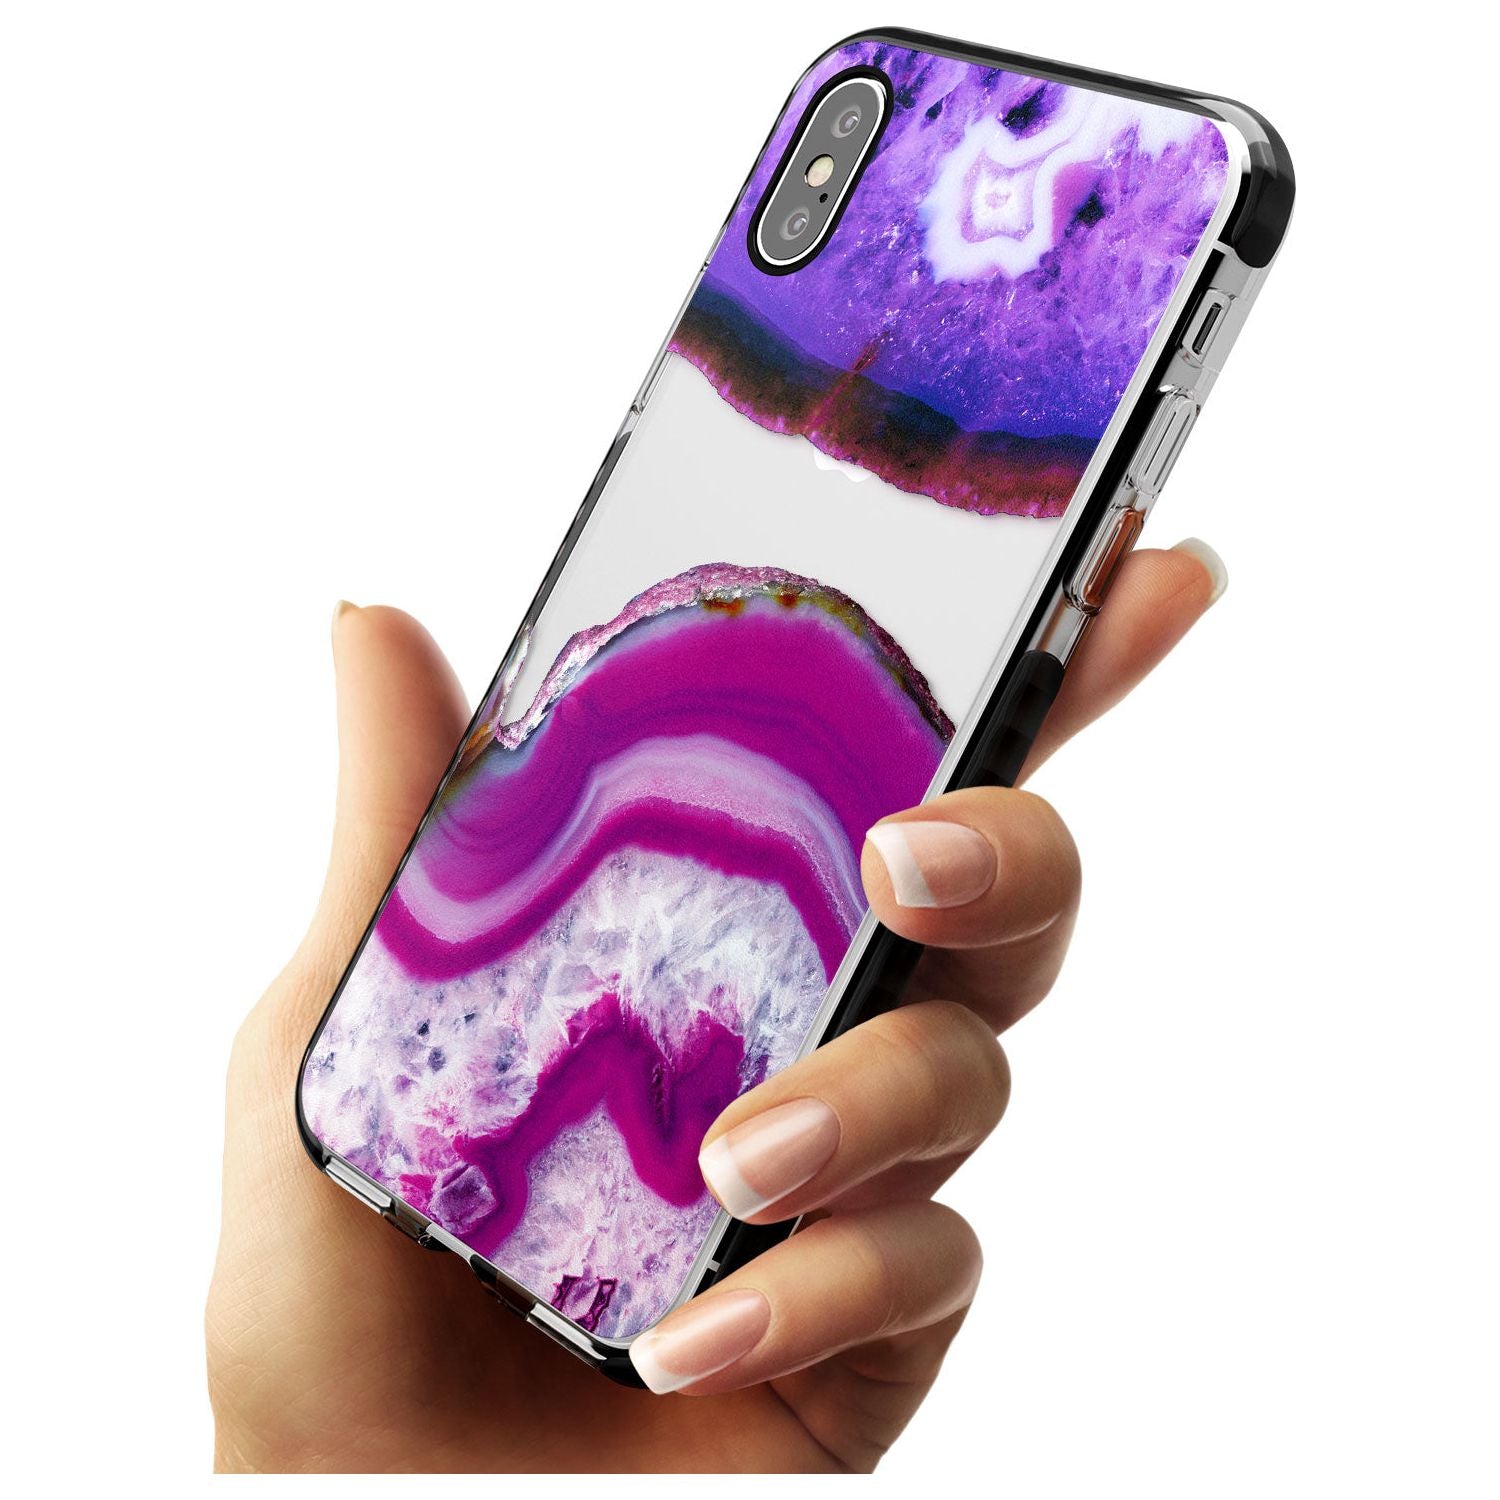 Purple & White Gemstone Crystal Clear Design Black Impact Phone Case for iPhone X XS Max XR